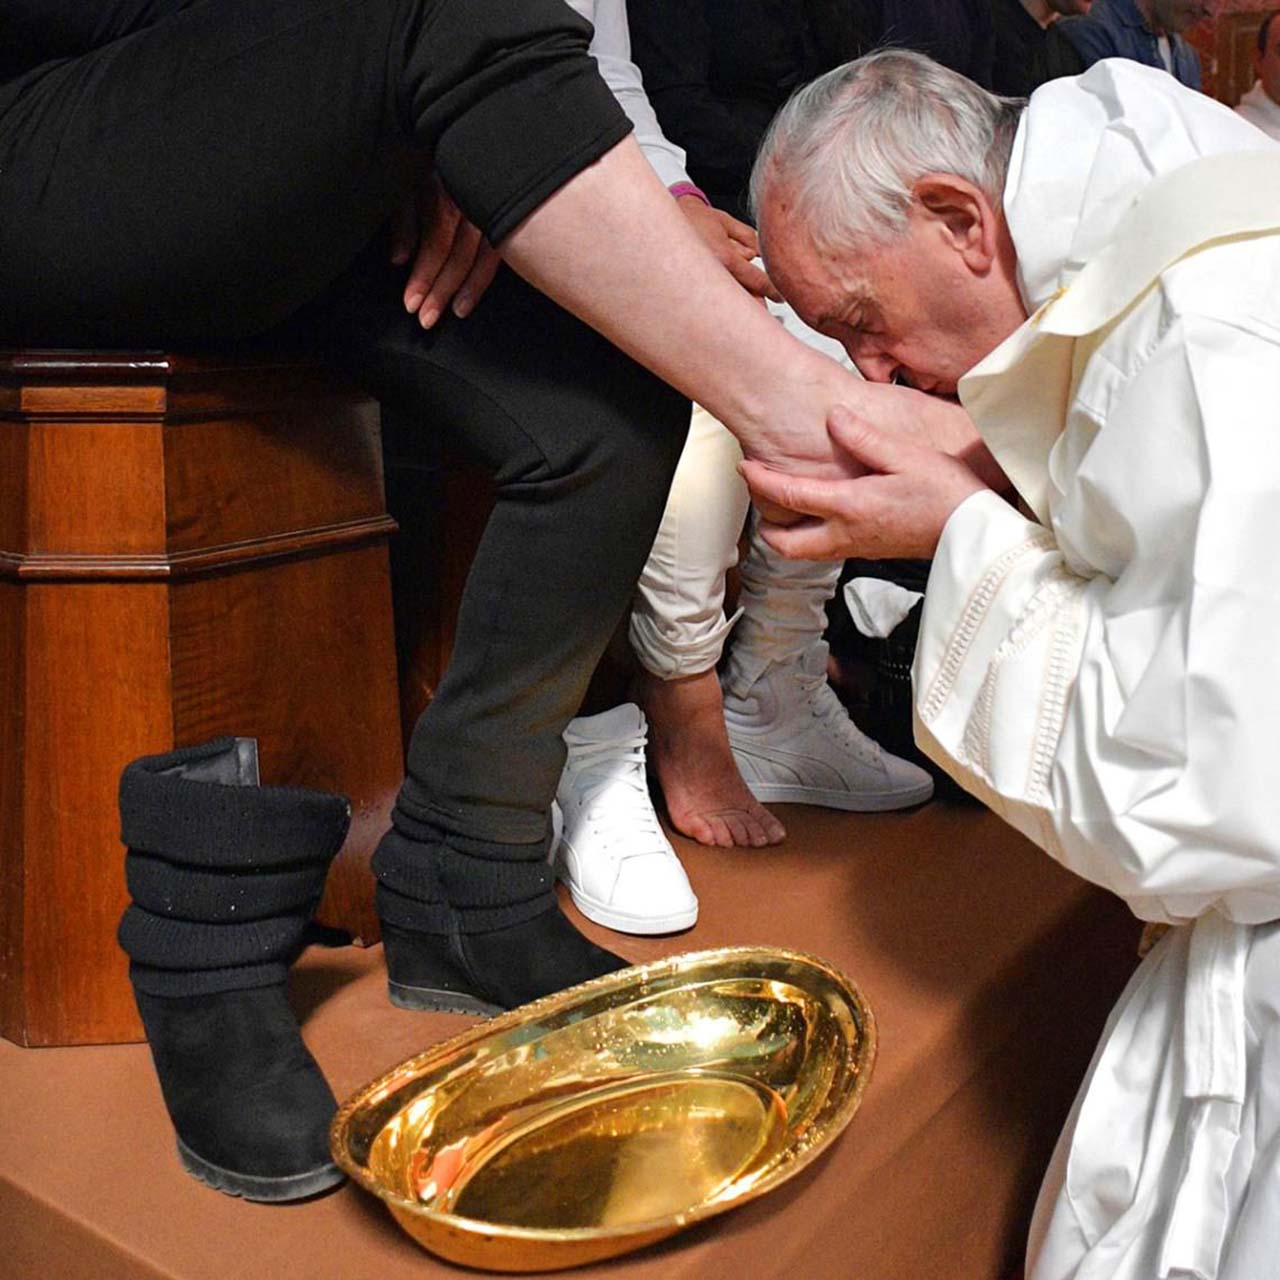 22 Photos From 2017 That Tell A Story: Pope Francis is washing, drying and kissing feet of Paliano maximum security prison’s inmate to offer hope to society's most despised people.